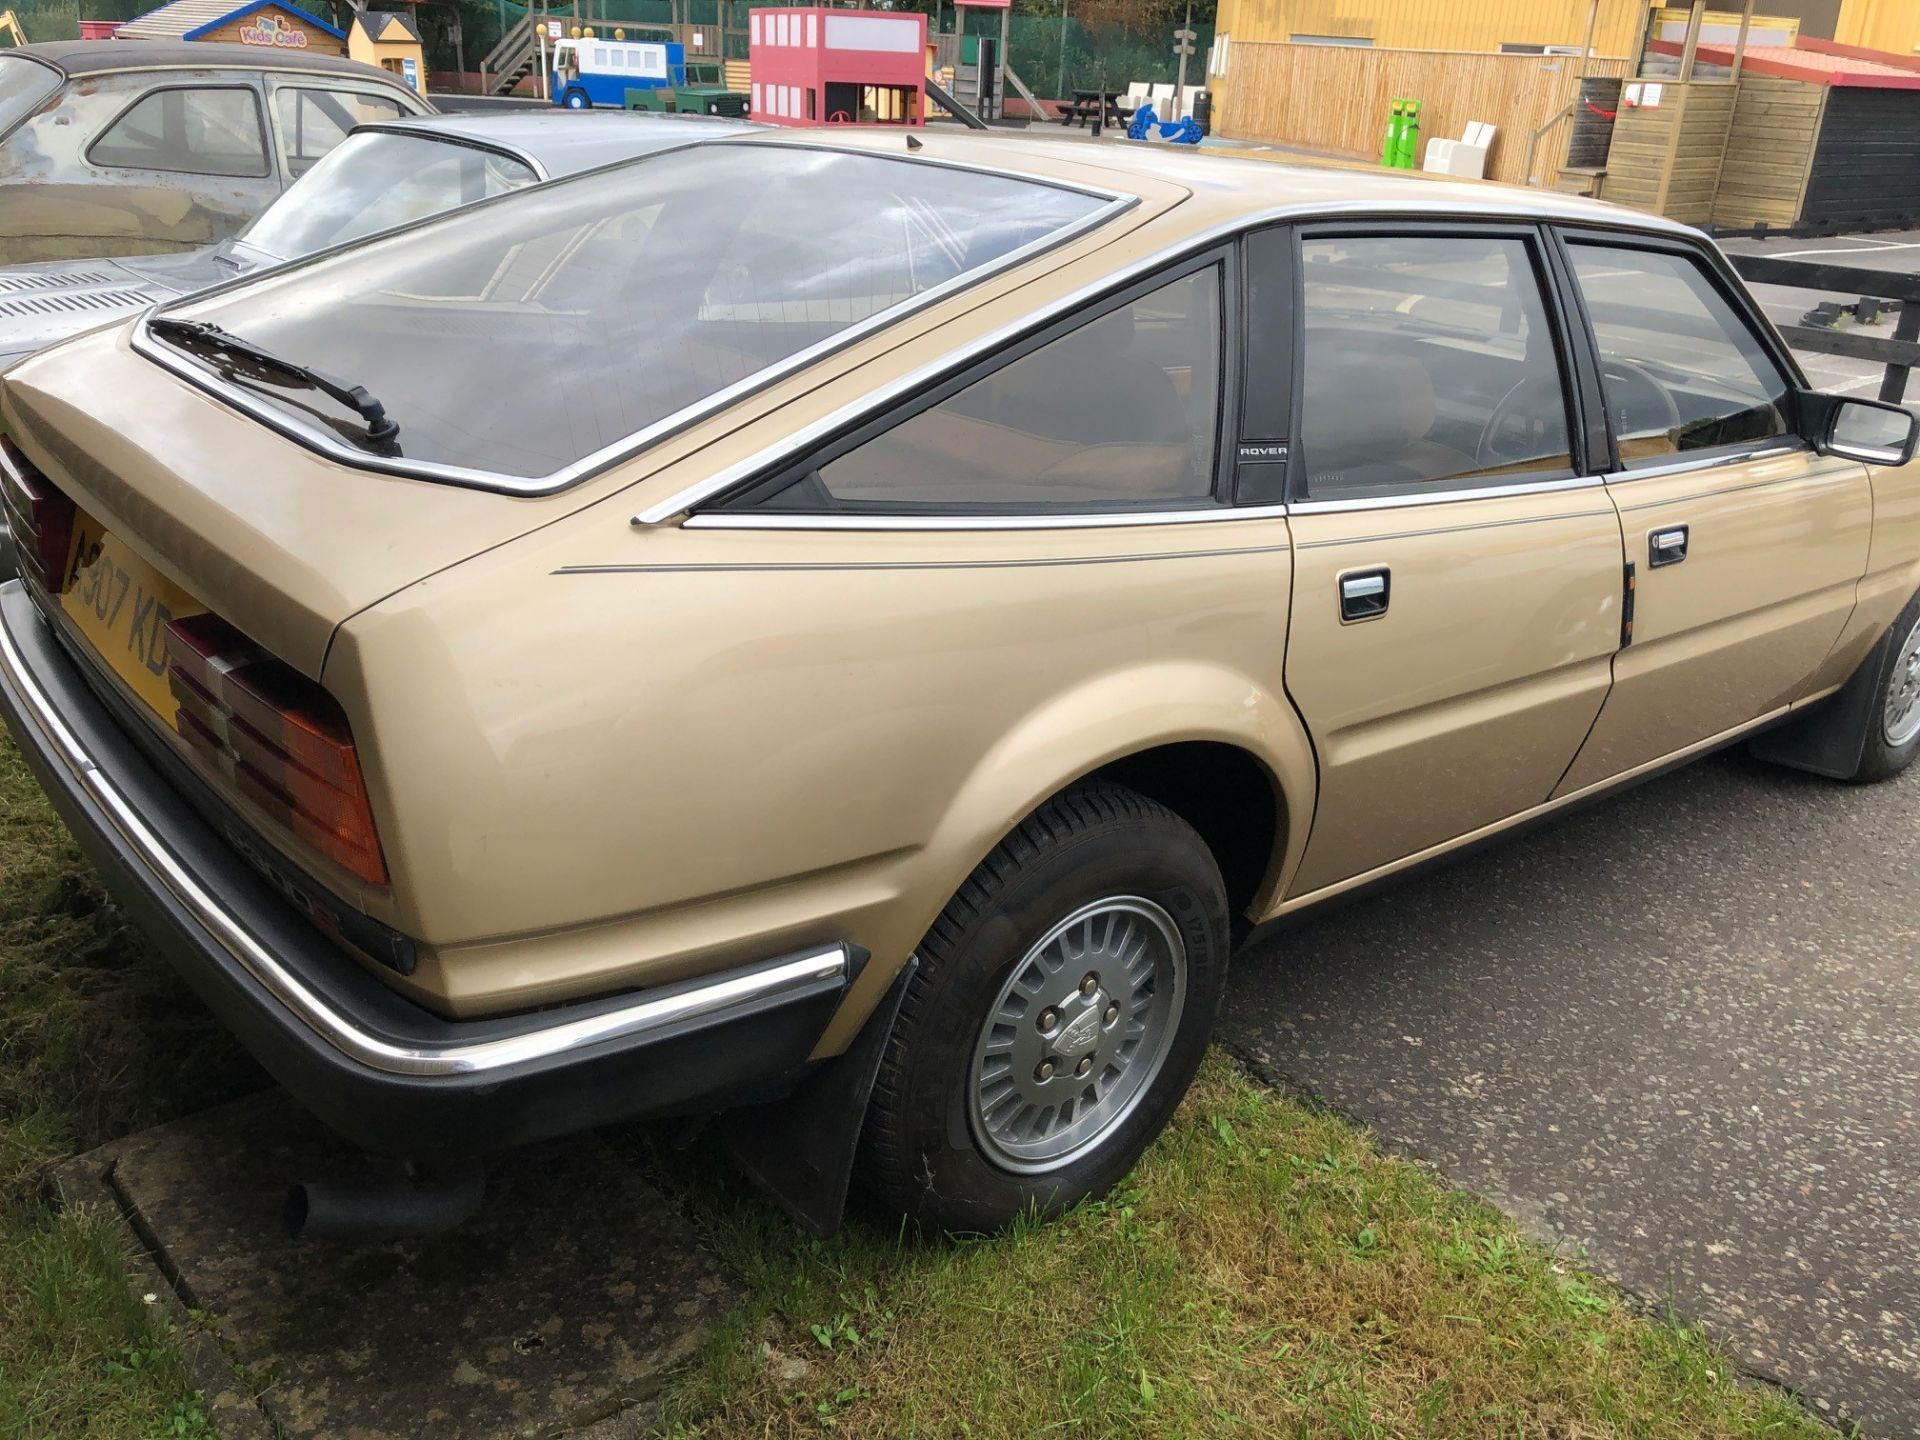 1984 Rover SD1 2300S Registration number A907 KDU Champagne Gold metallic Automatic Low miles - Image 7 of 14